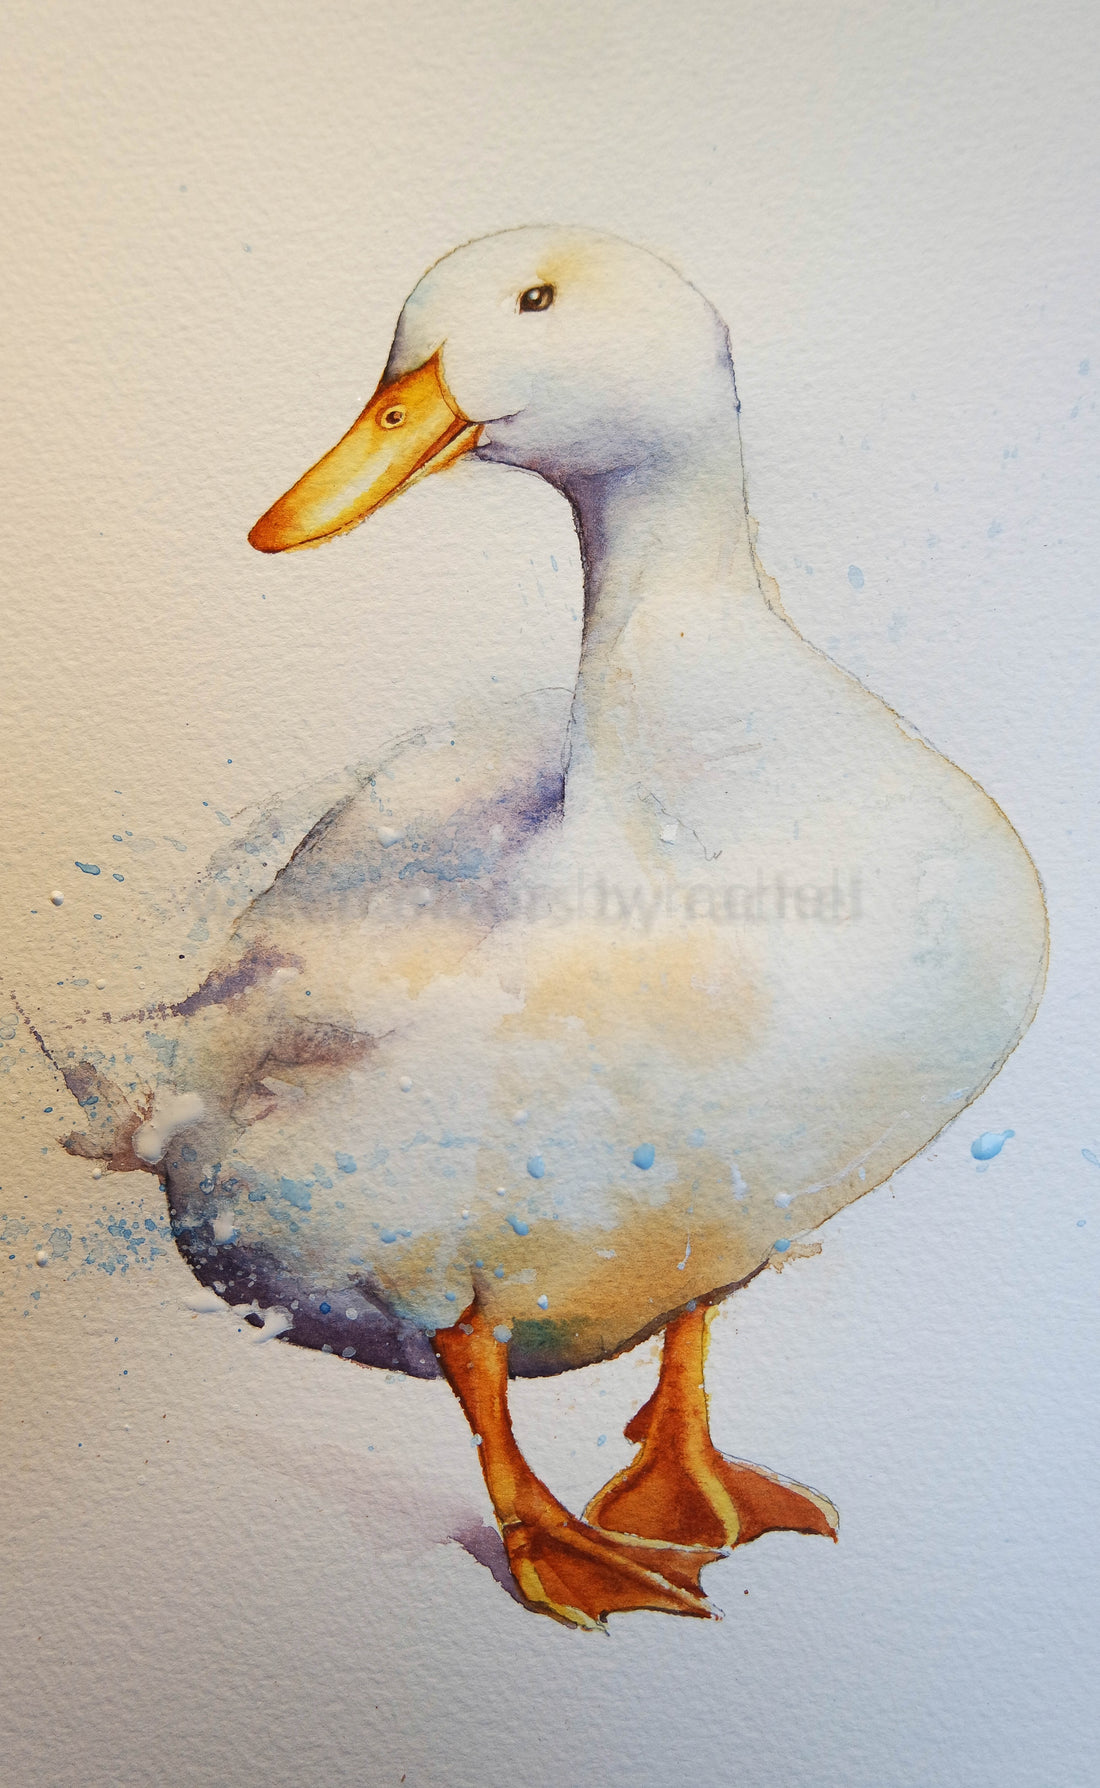 How to paint a white duck on white paper.